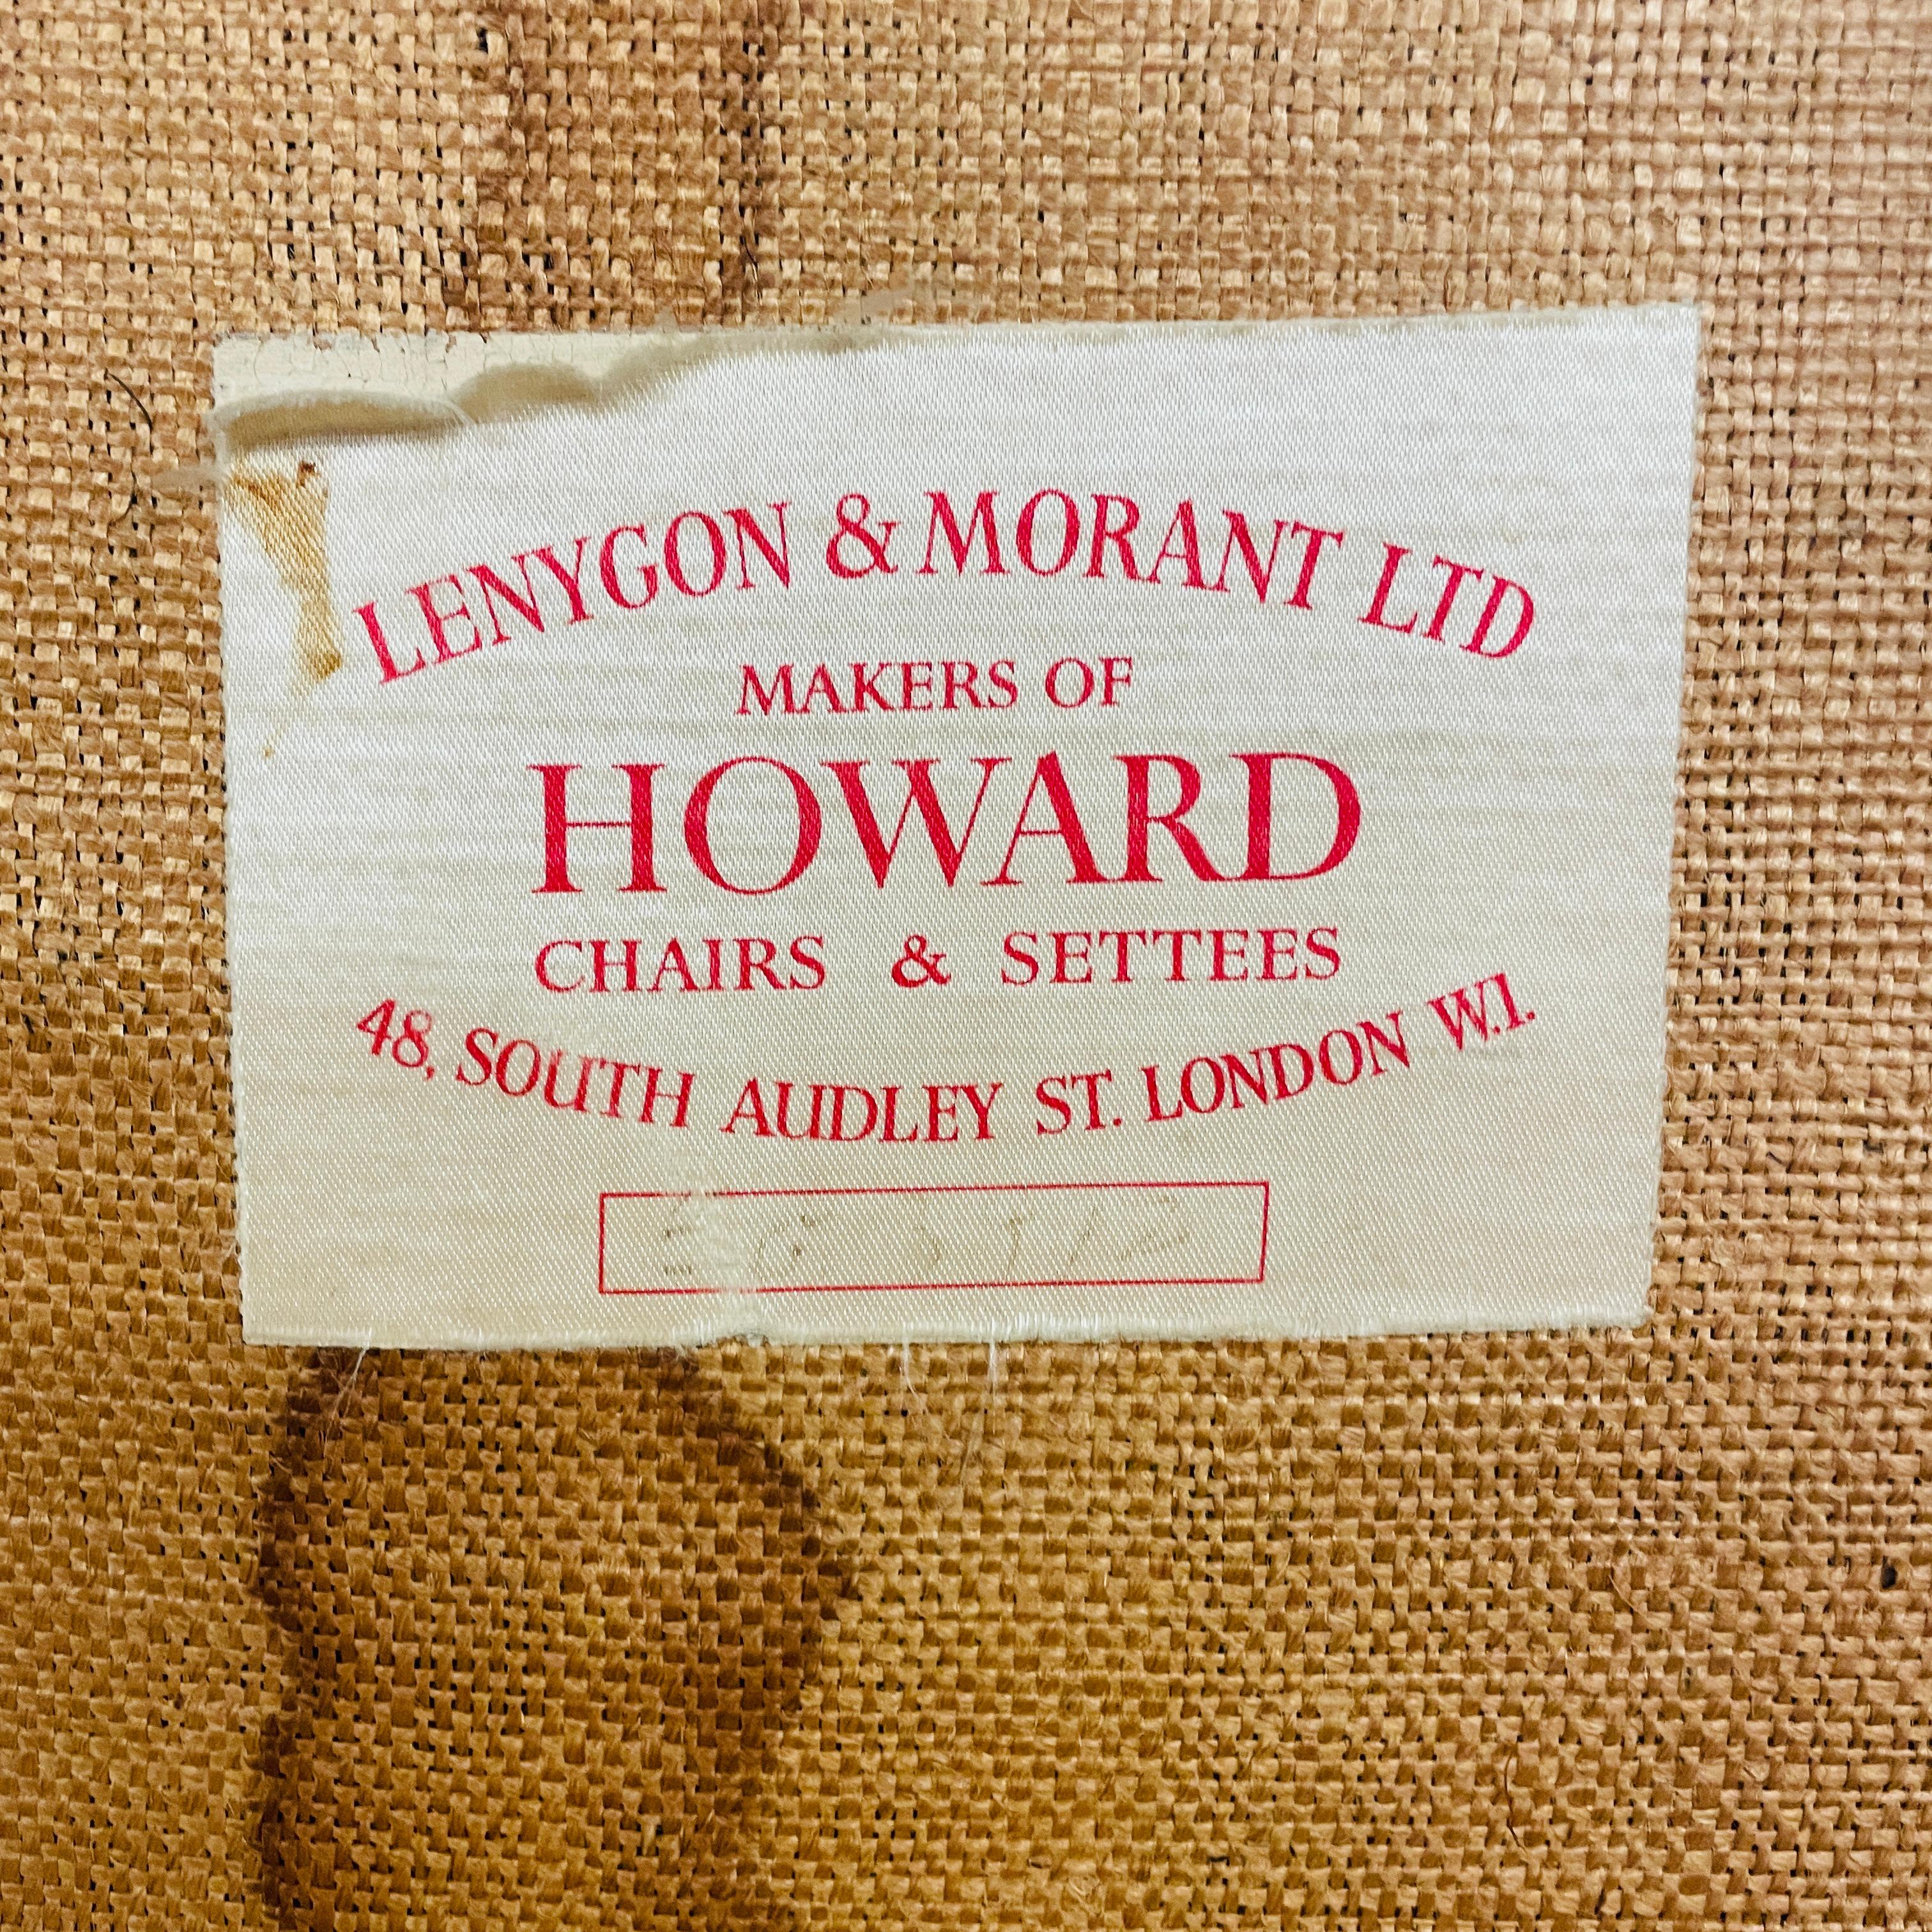 A Well Proportioned, English Slipper Chair made by Lenygon & Morant Ltd, Makers of Howard Chairs & Settees. Circa 1950s.

The chair is in visible need of reupholstery but some of the original Howard ticking fabric is present! 

The chair was too